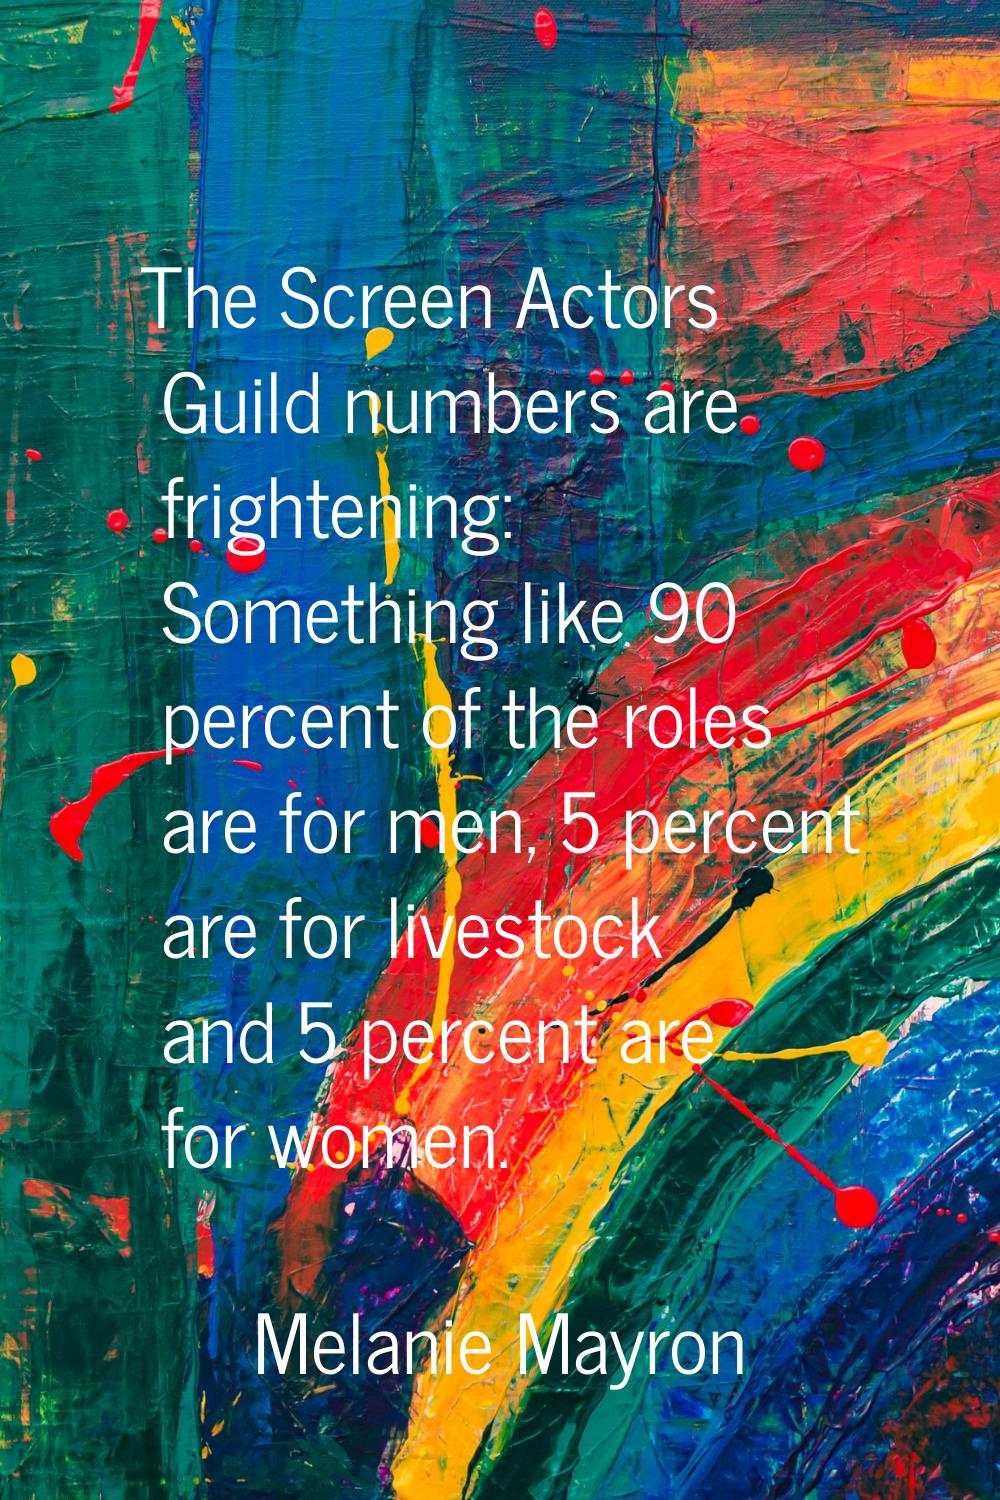 The Screen Actors Guild numbers are frightening: Something like 90 percent of the roles are for men